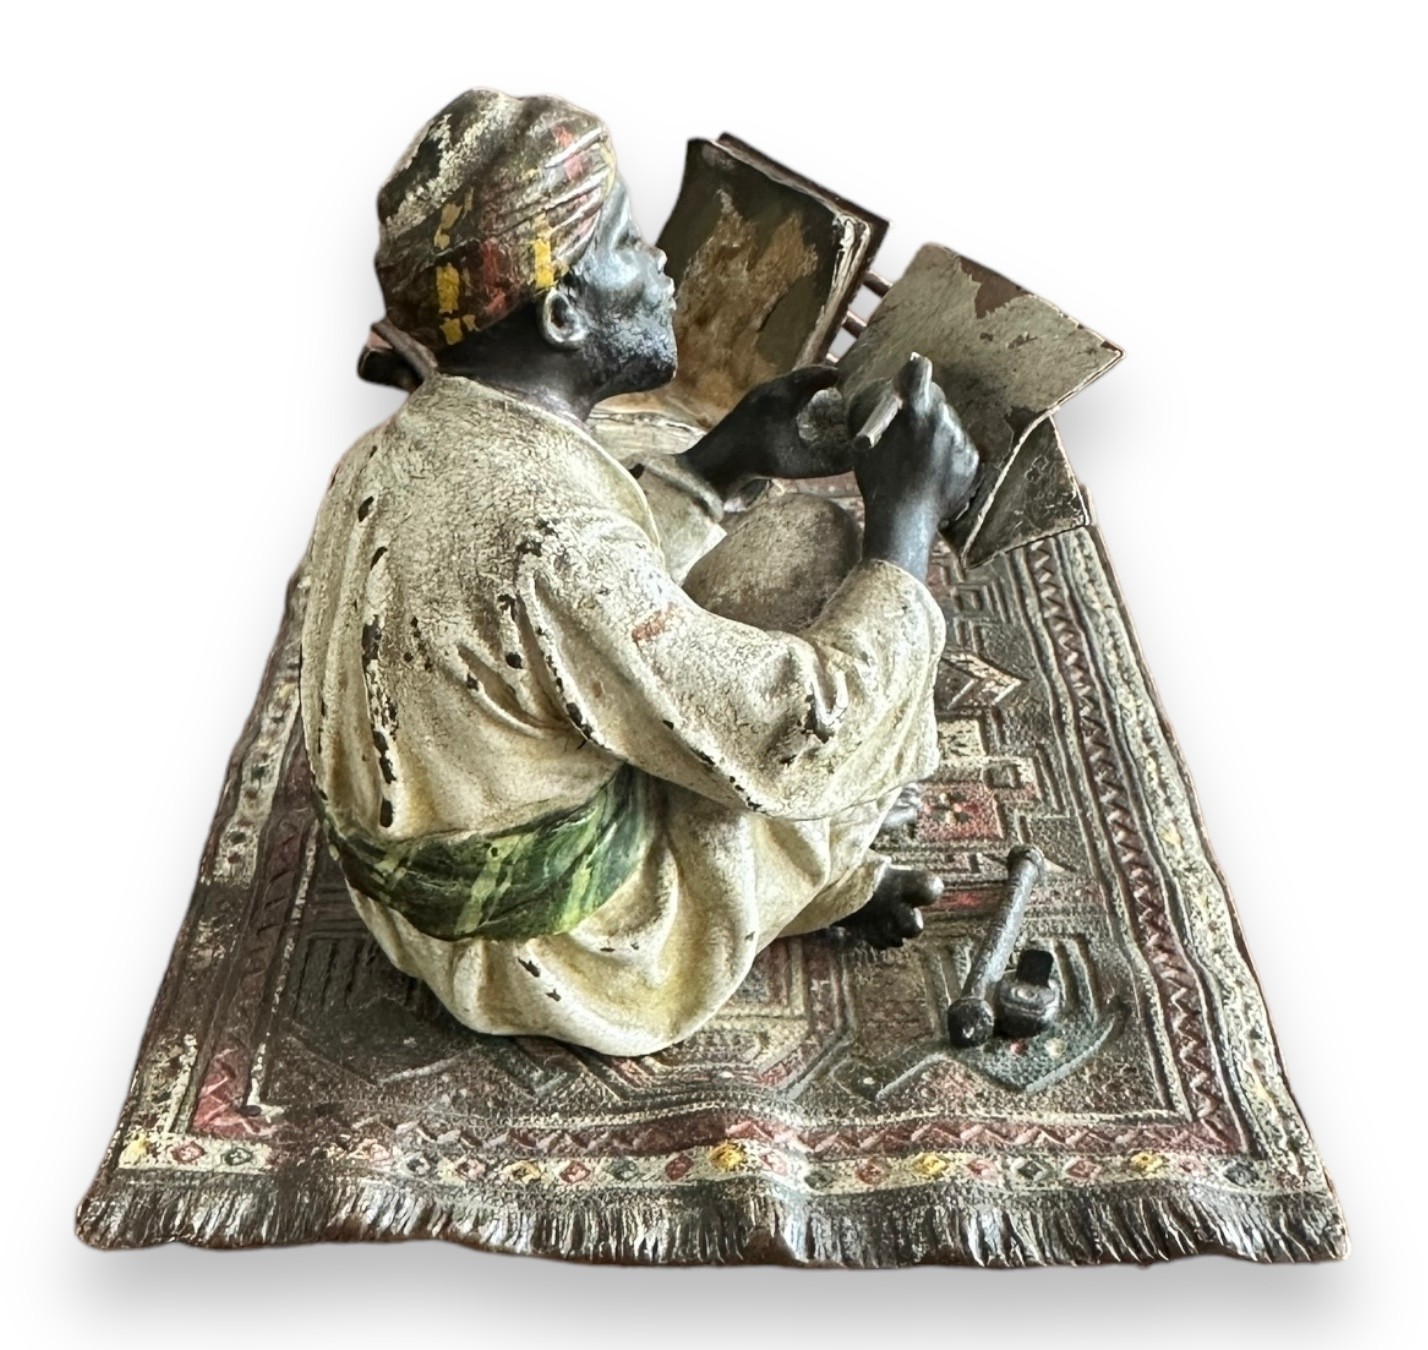 Franz Bergman (Austrian, 1861-1936), late 19th century, cast as an Arab scribe seated on a carpet, - Image 4 of 5